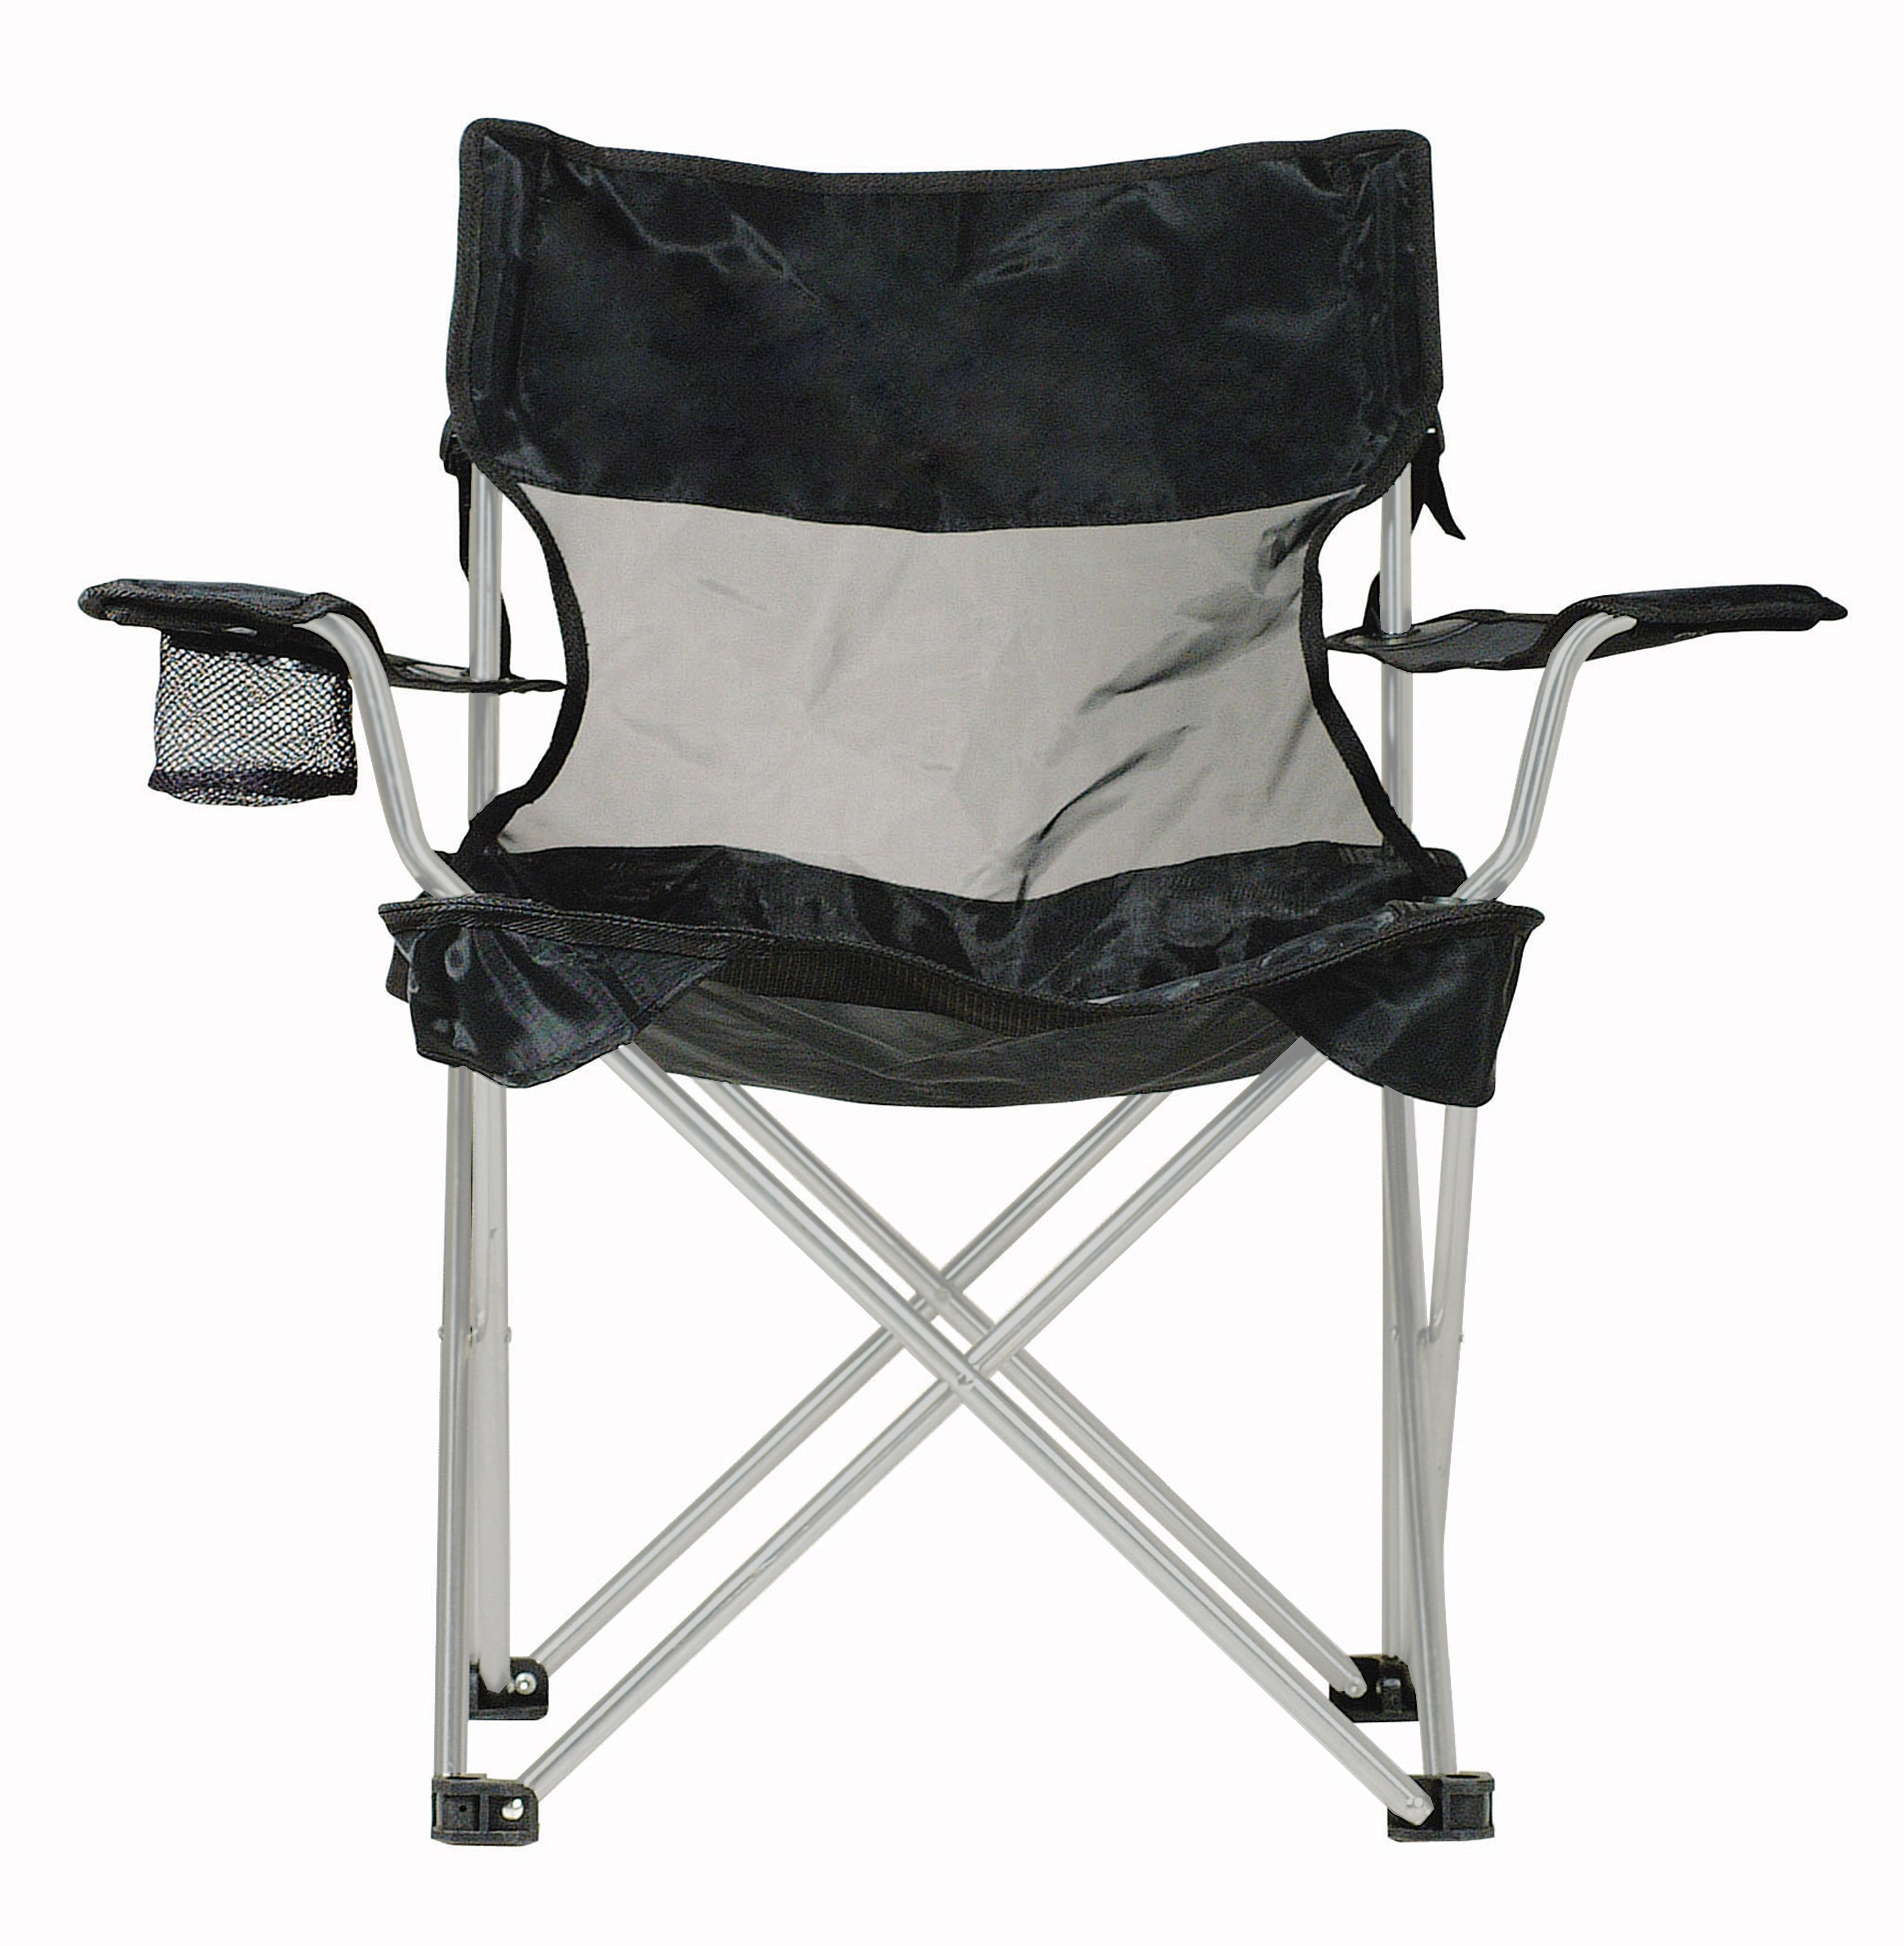 Pros and Cons of Camping Chairs